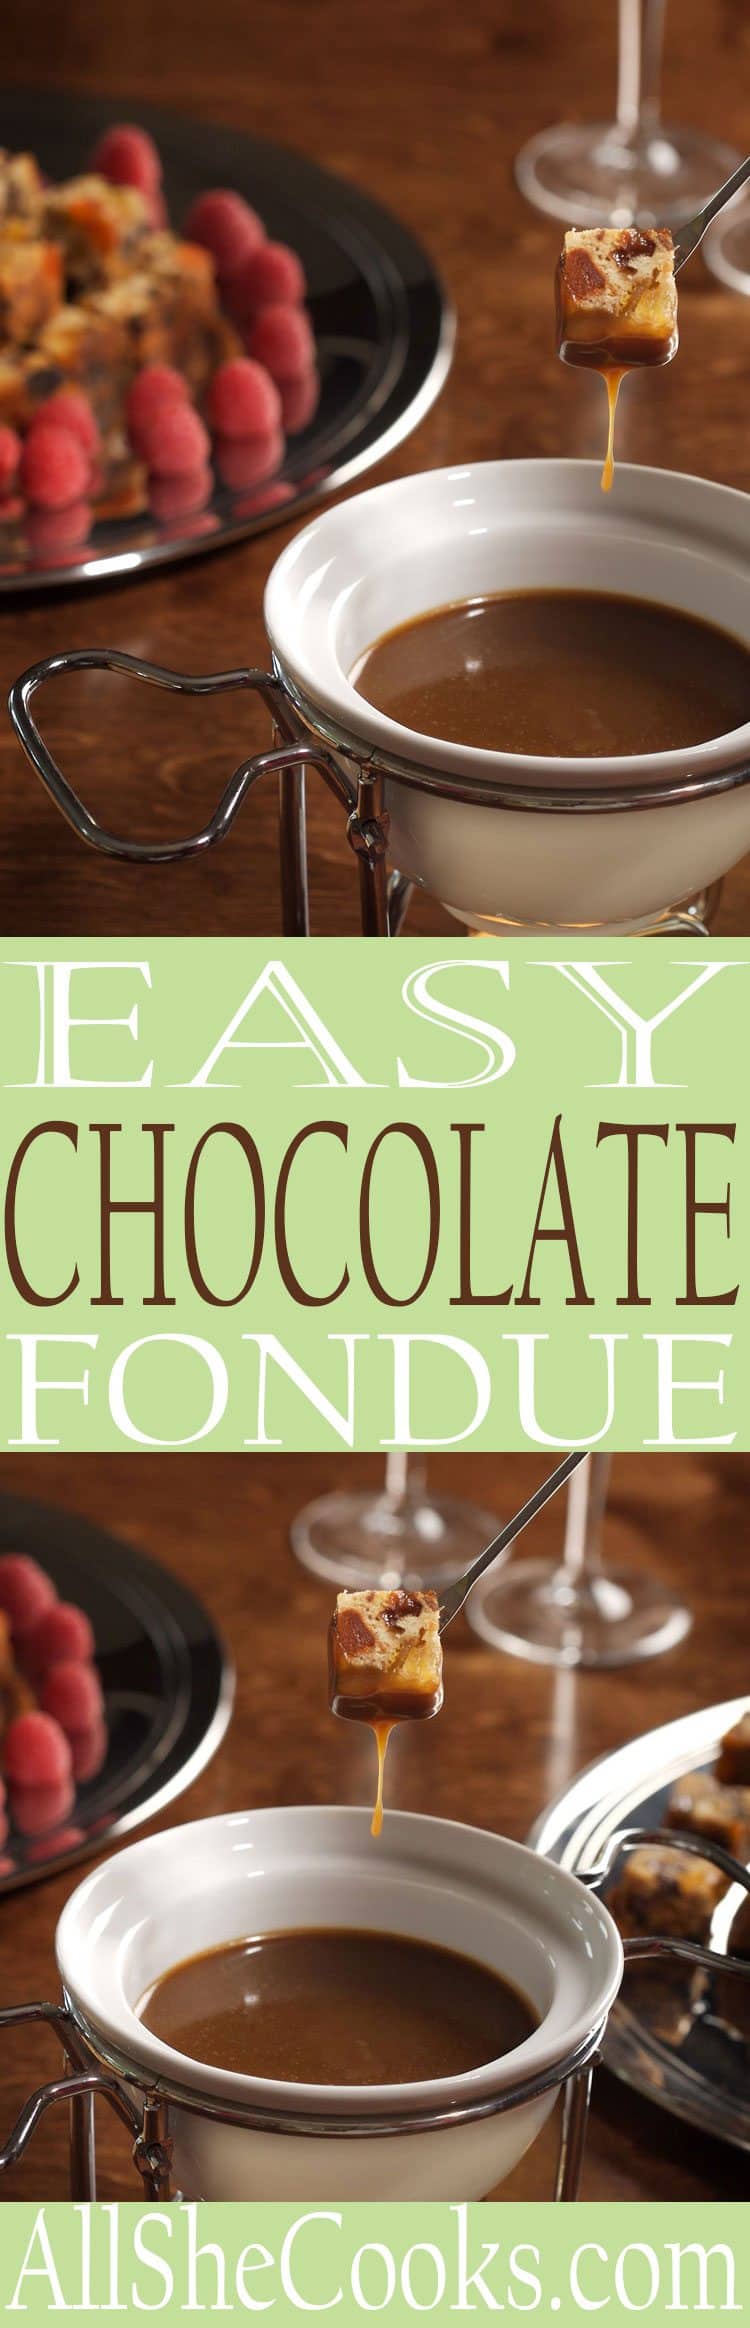 Chocolate Fondue should be one of lifes simple pleasures. It is a delightful way to celebrate the sweetness of life...especially for a Valentines Day dessert/